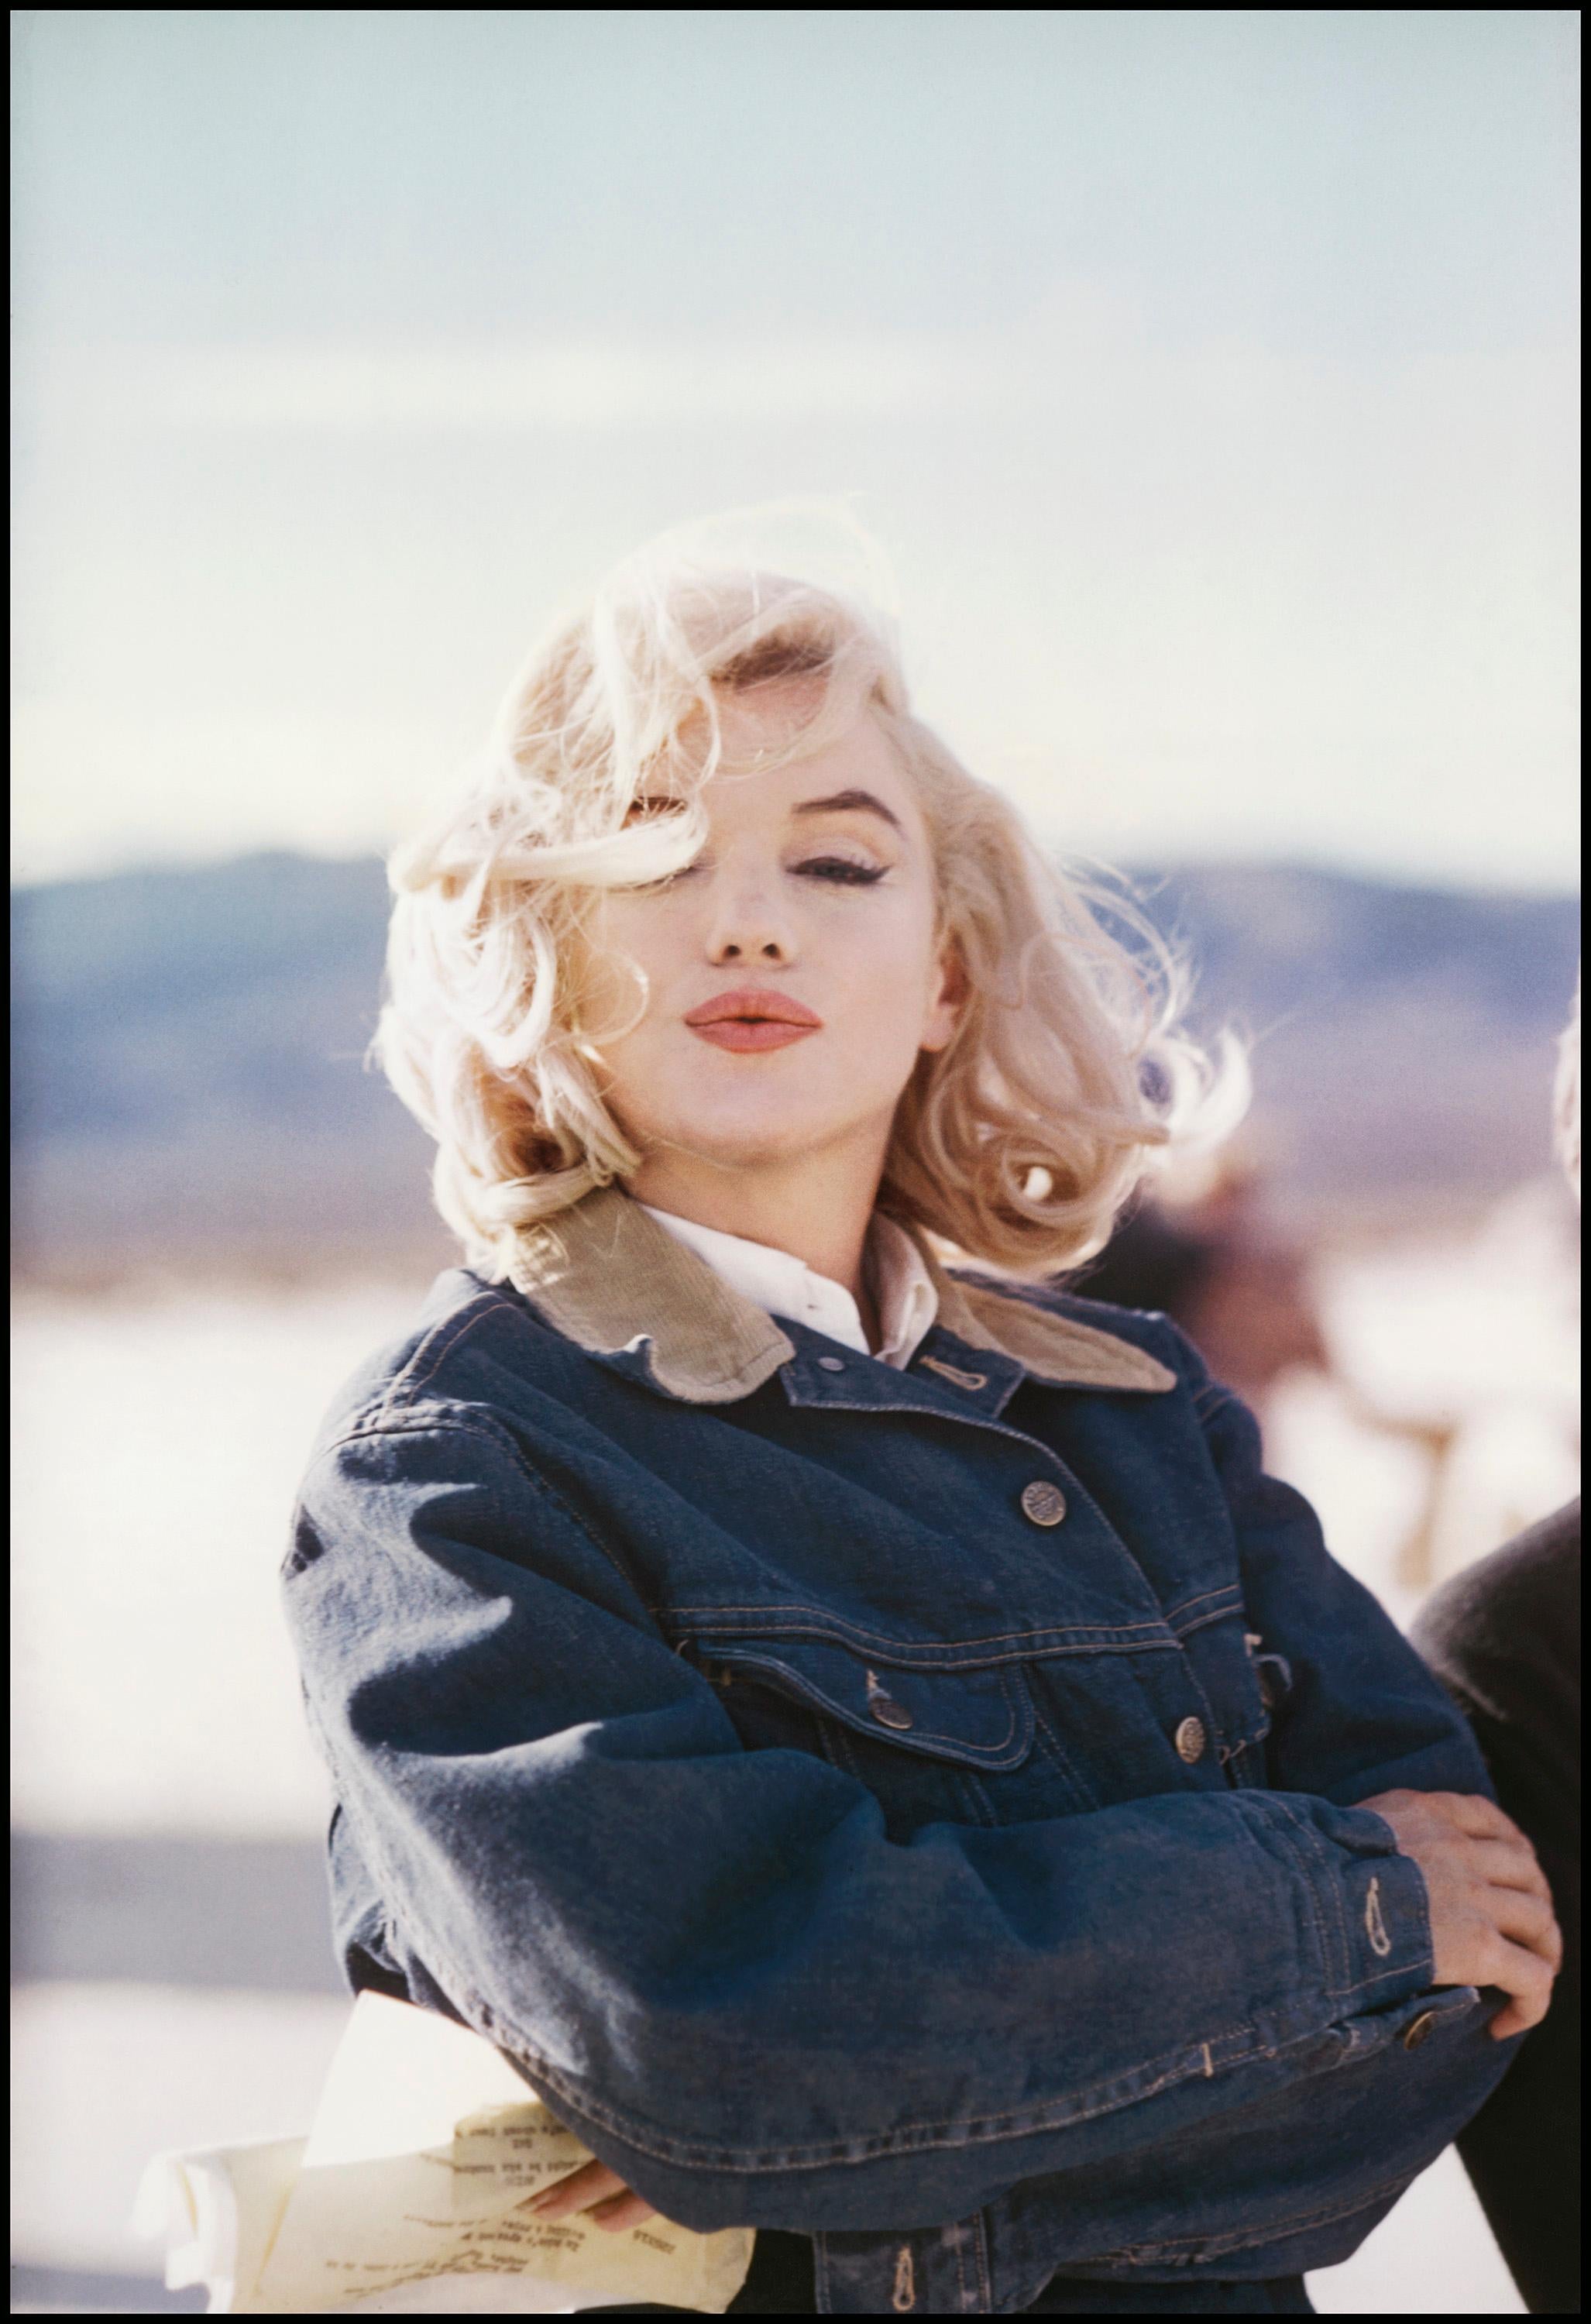 Marilyn Monroe on the set of ‘The Misfits’, Reno, Nevada, 1960.

All available sizes and editions:
24" x 20", Edition of 25 + 3 Artist Proofs
34" x 24", Edition of 25 + 3 Artist Proofs

"Eve Arnold, born in 1912 to Russian-immigrant parents in